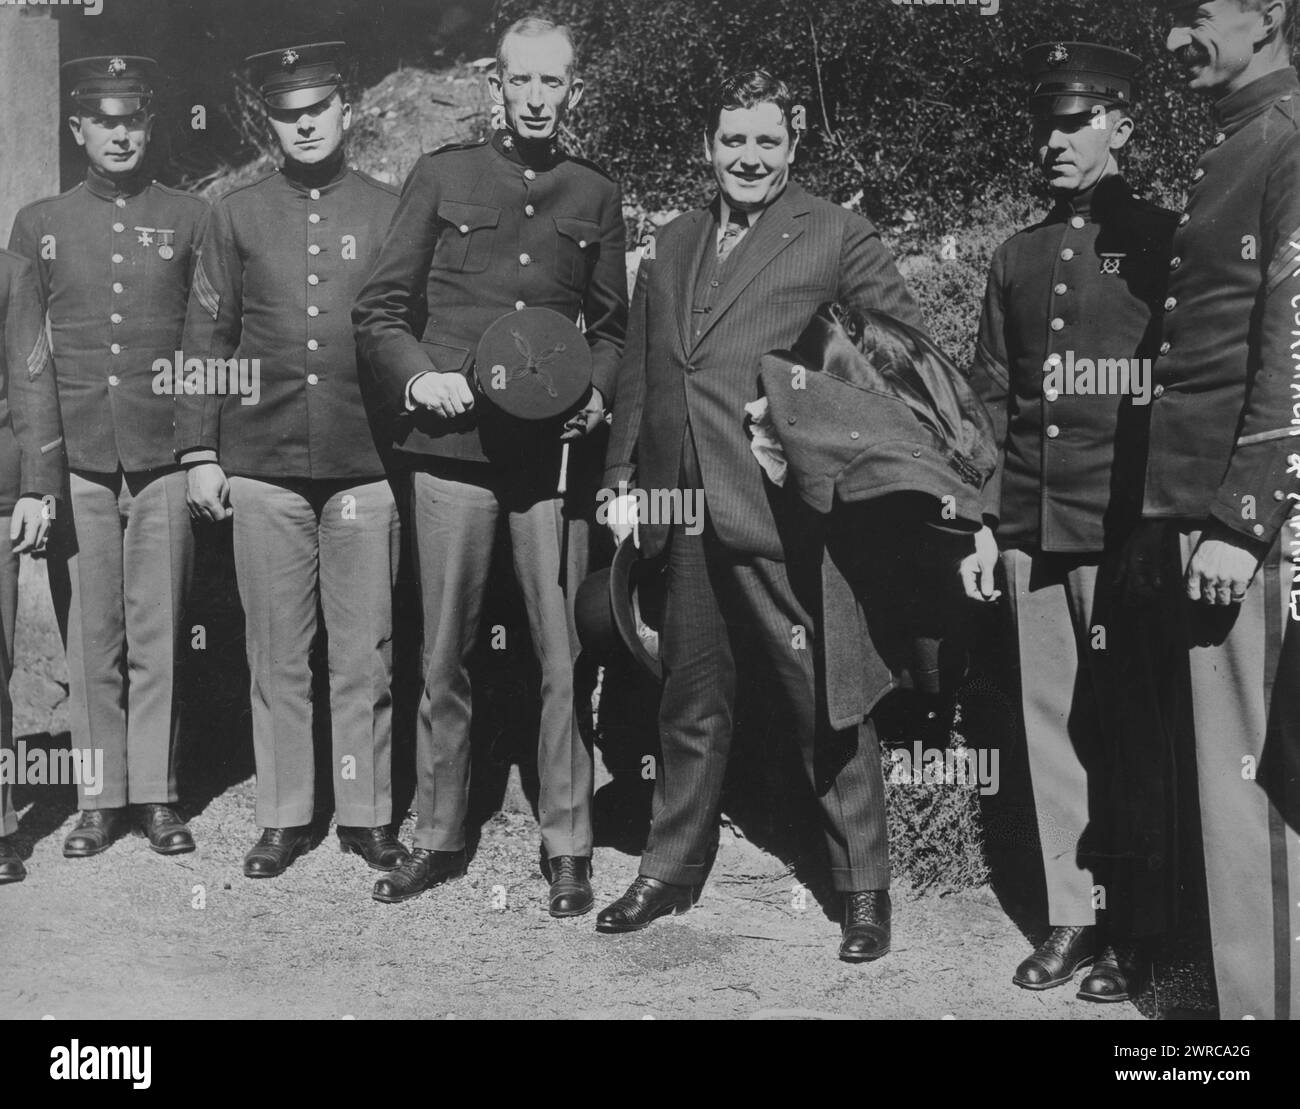 McCormack & Marines, Photograph shows Irish American tenor singer John McCormack (1884-1945) with U.S. Marine Corps soldiers., between ca. 1915 and ca. 1920, Glass negatives, 1 negative: glass Stock Photo